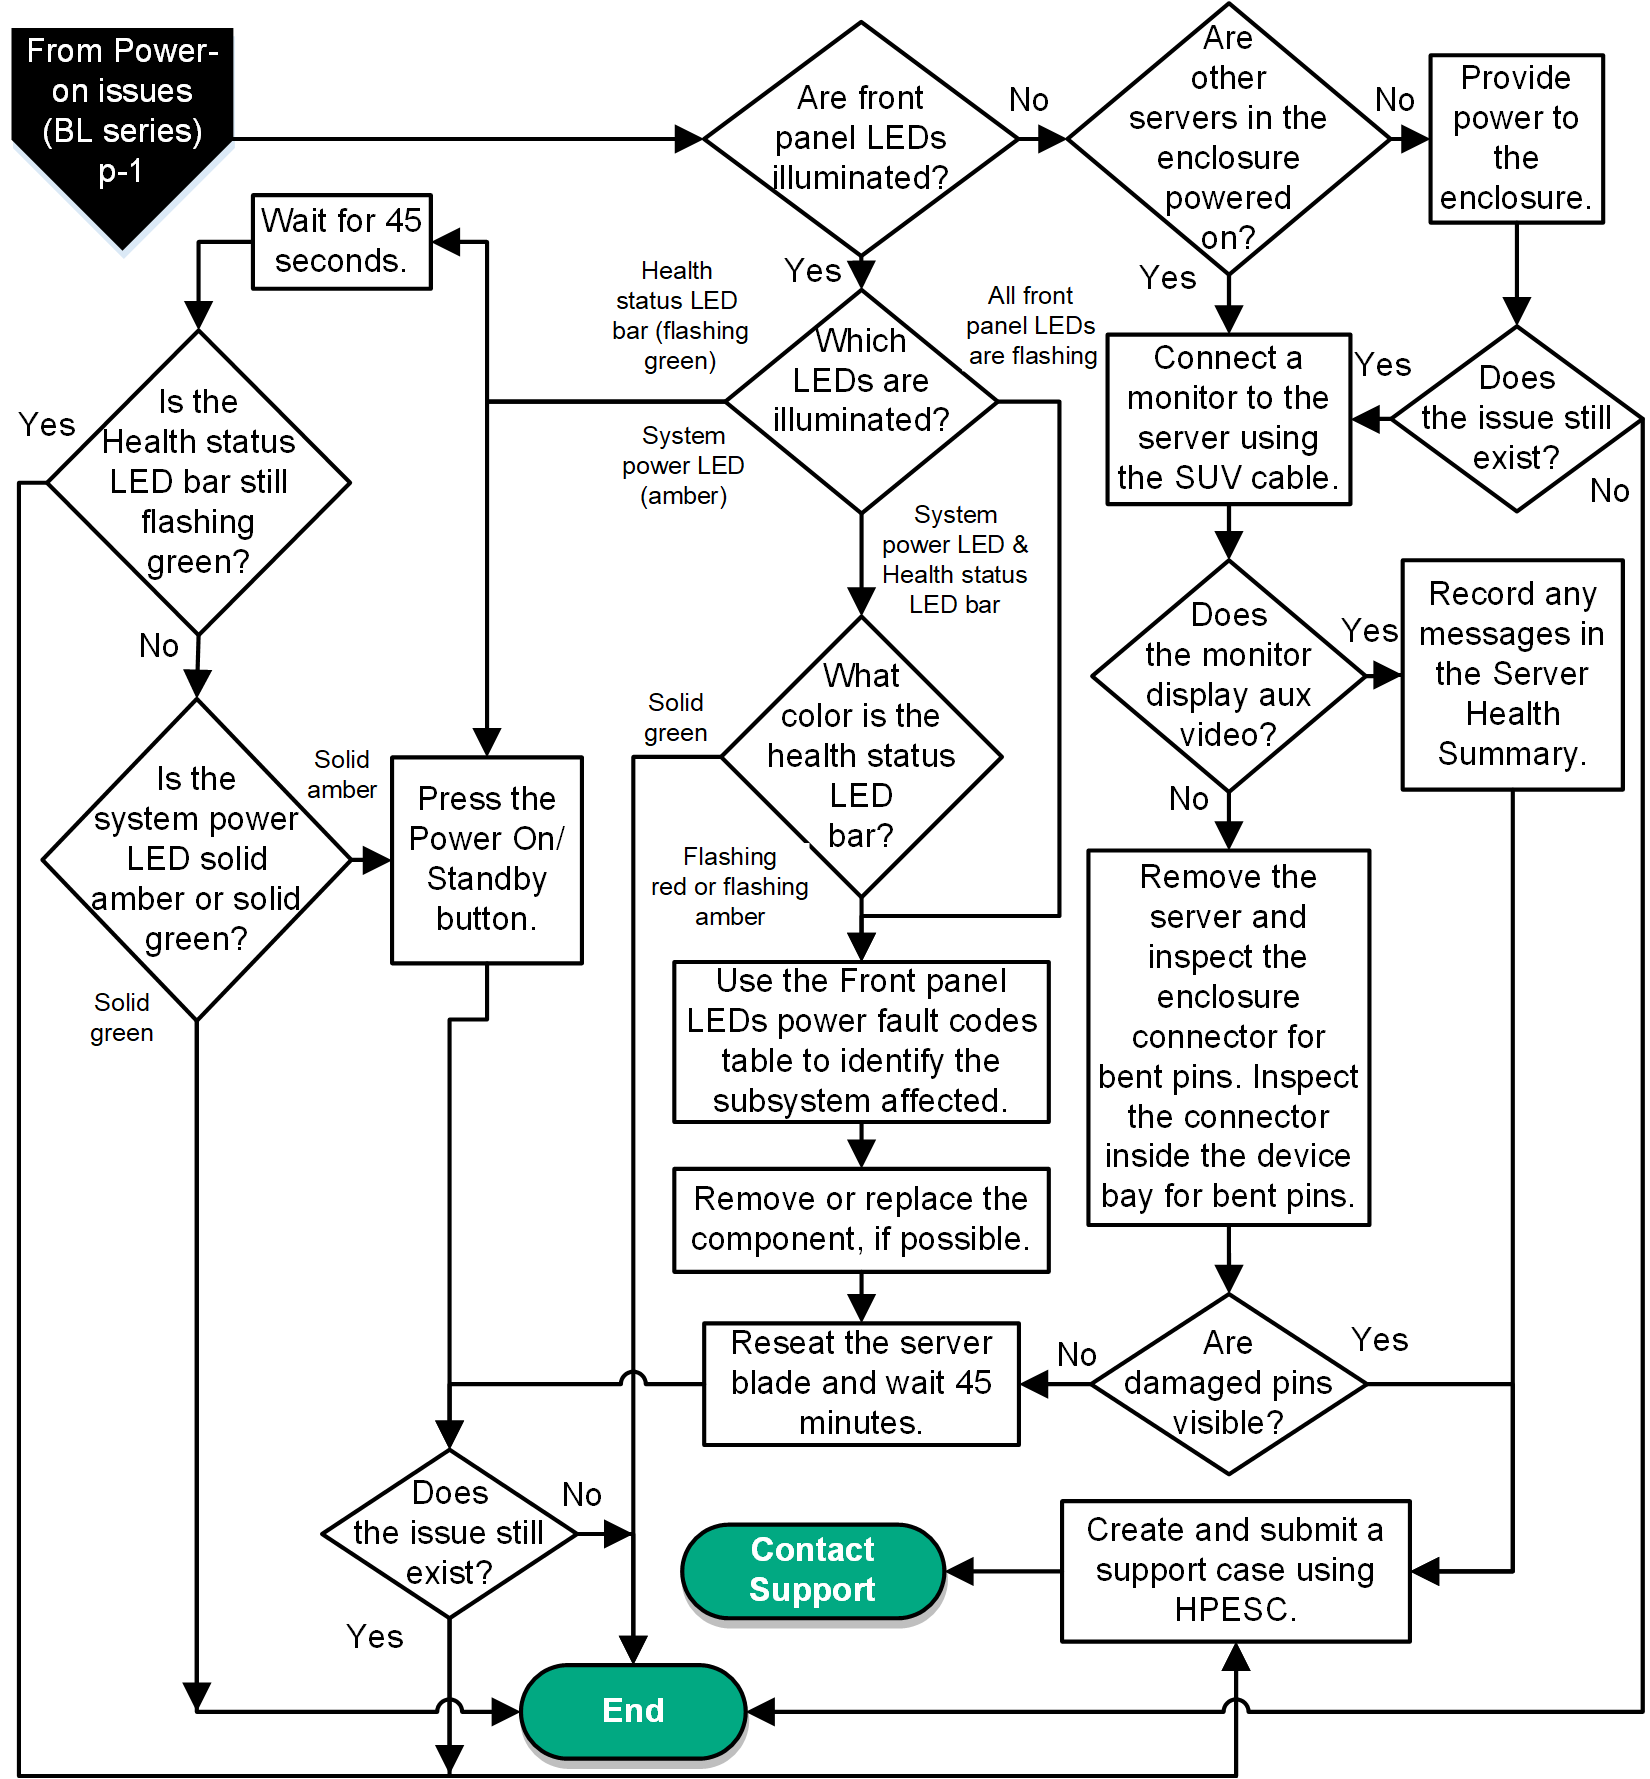 Power on issues flowchart for BL series server blades - Local troubleshooting